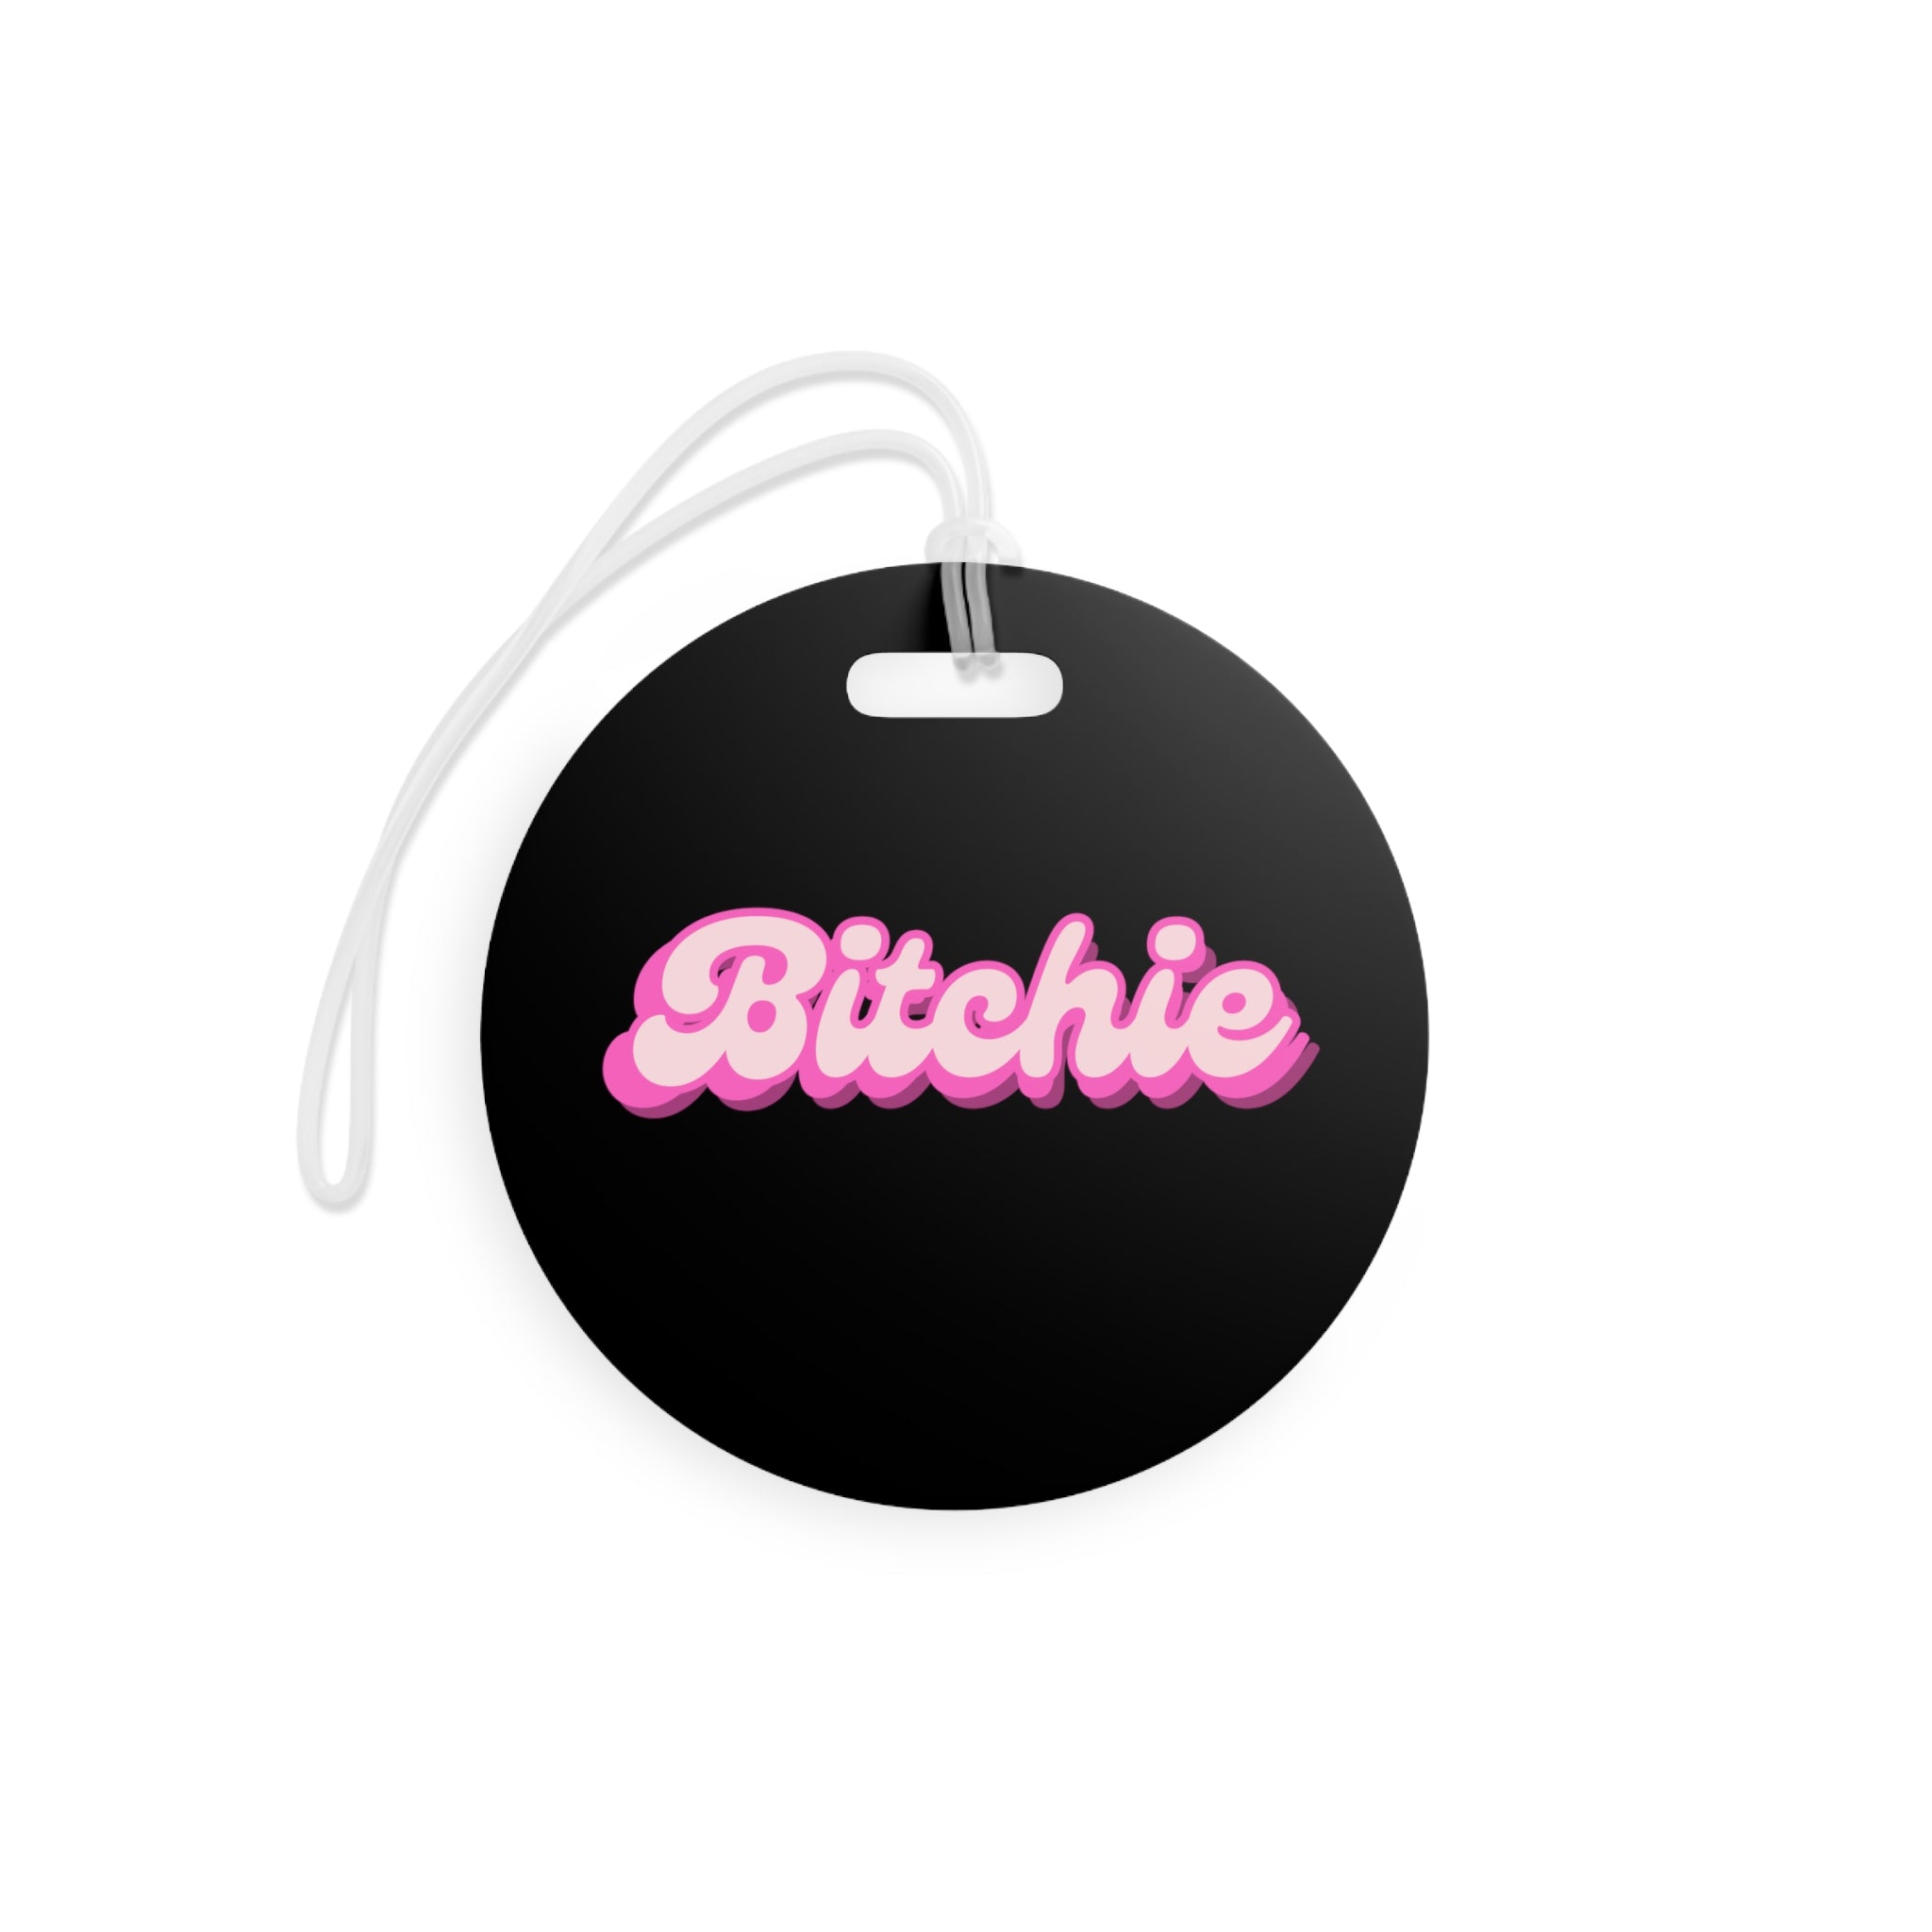  Bitchie (Barbie) Funny Luggage Tag in Black, Barbie Bag Tag, Funny Travel Lover Gift, Gift For Her Luggage TagRoundOnesize